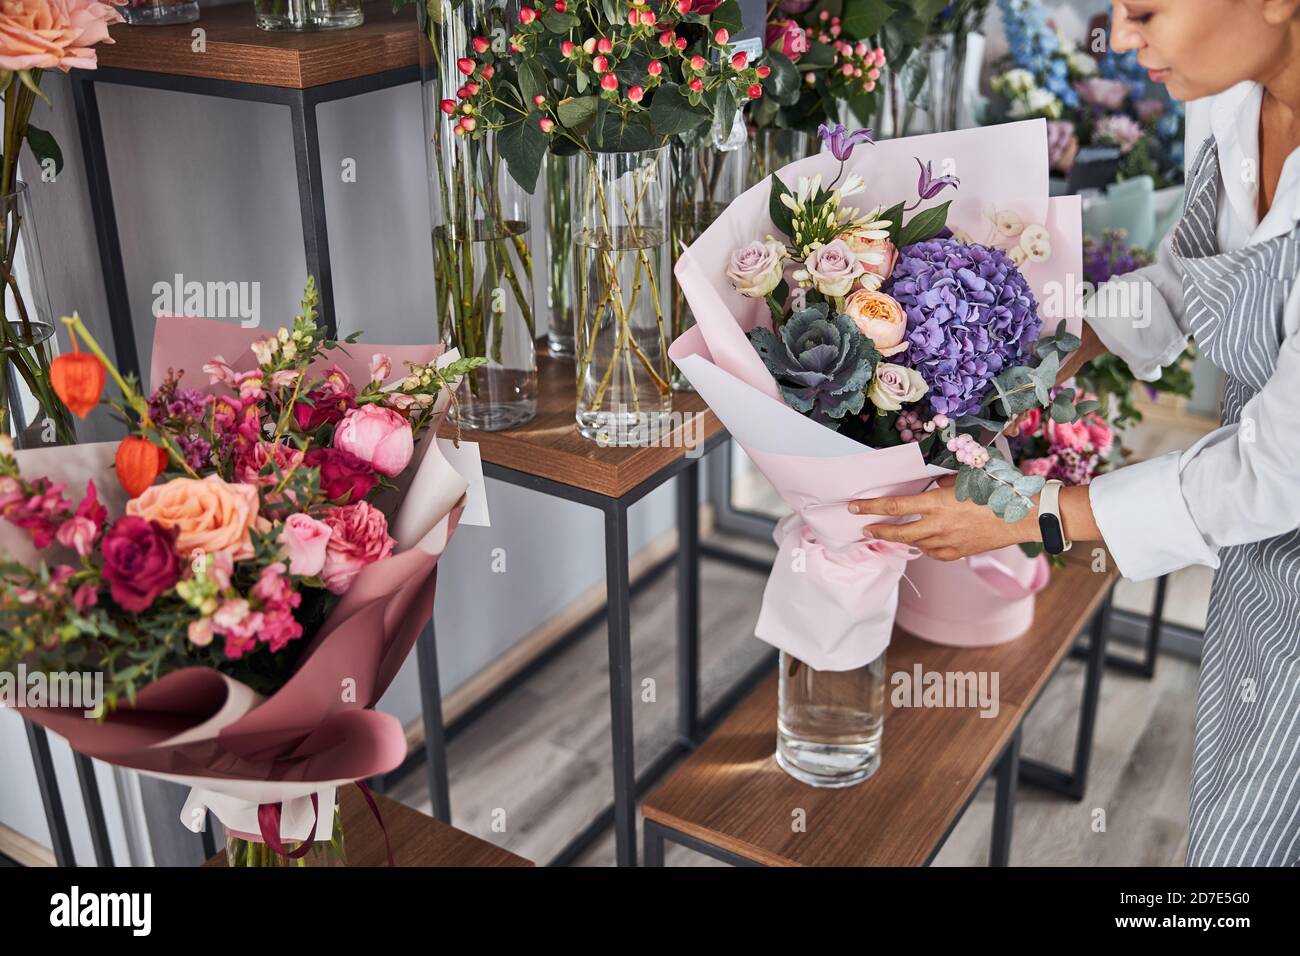 Responsible flower shop worker taking care of flower bouquets Stock ...